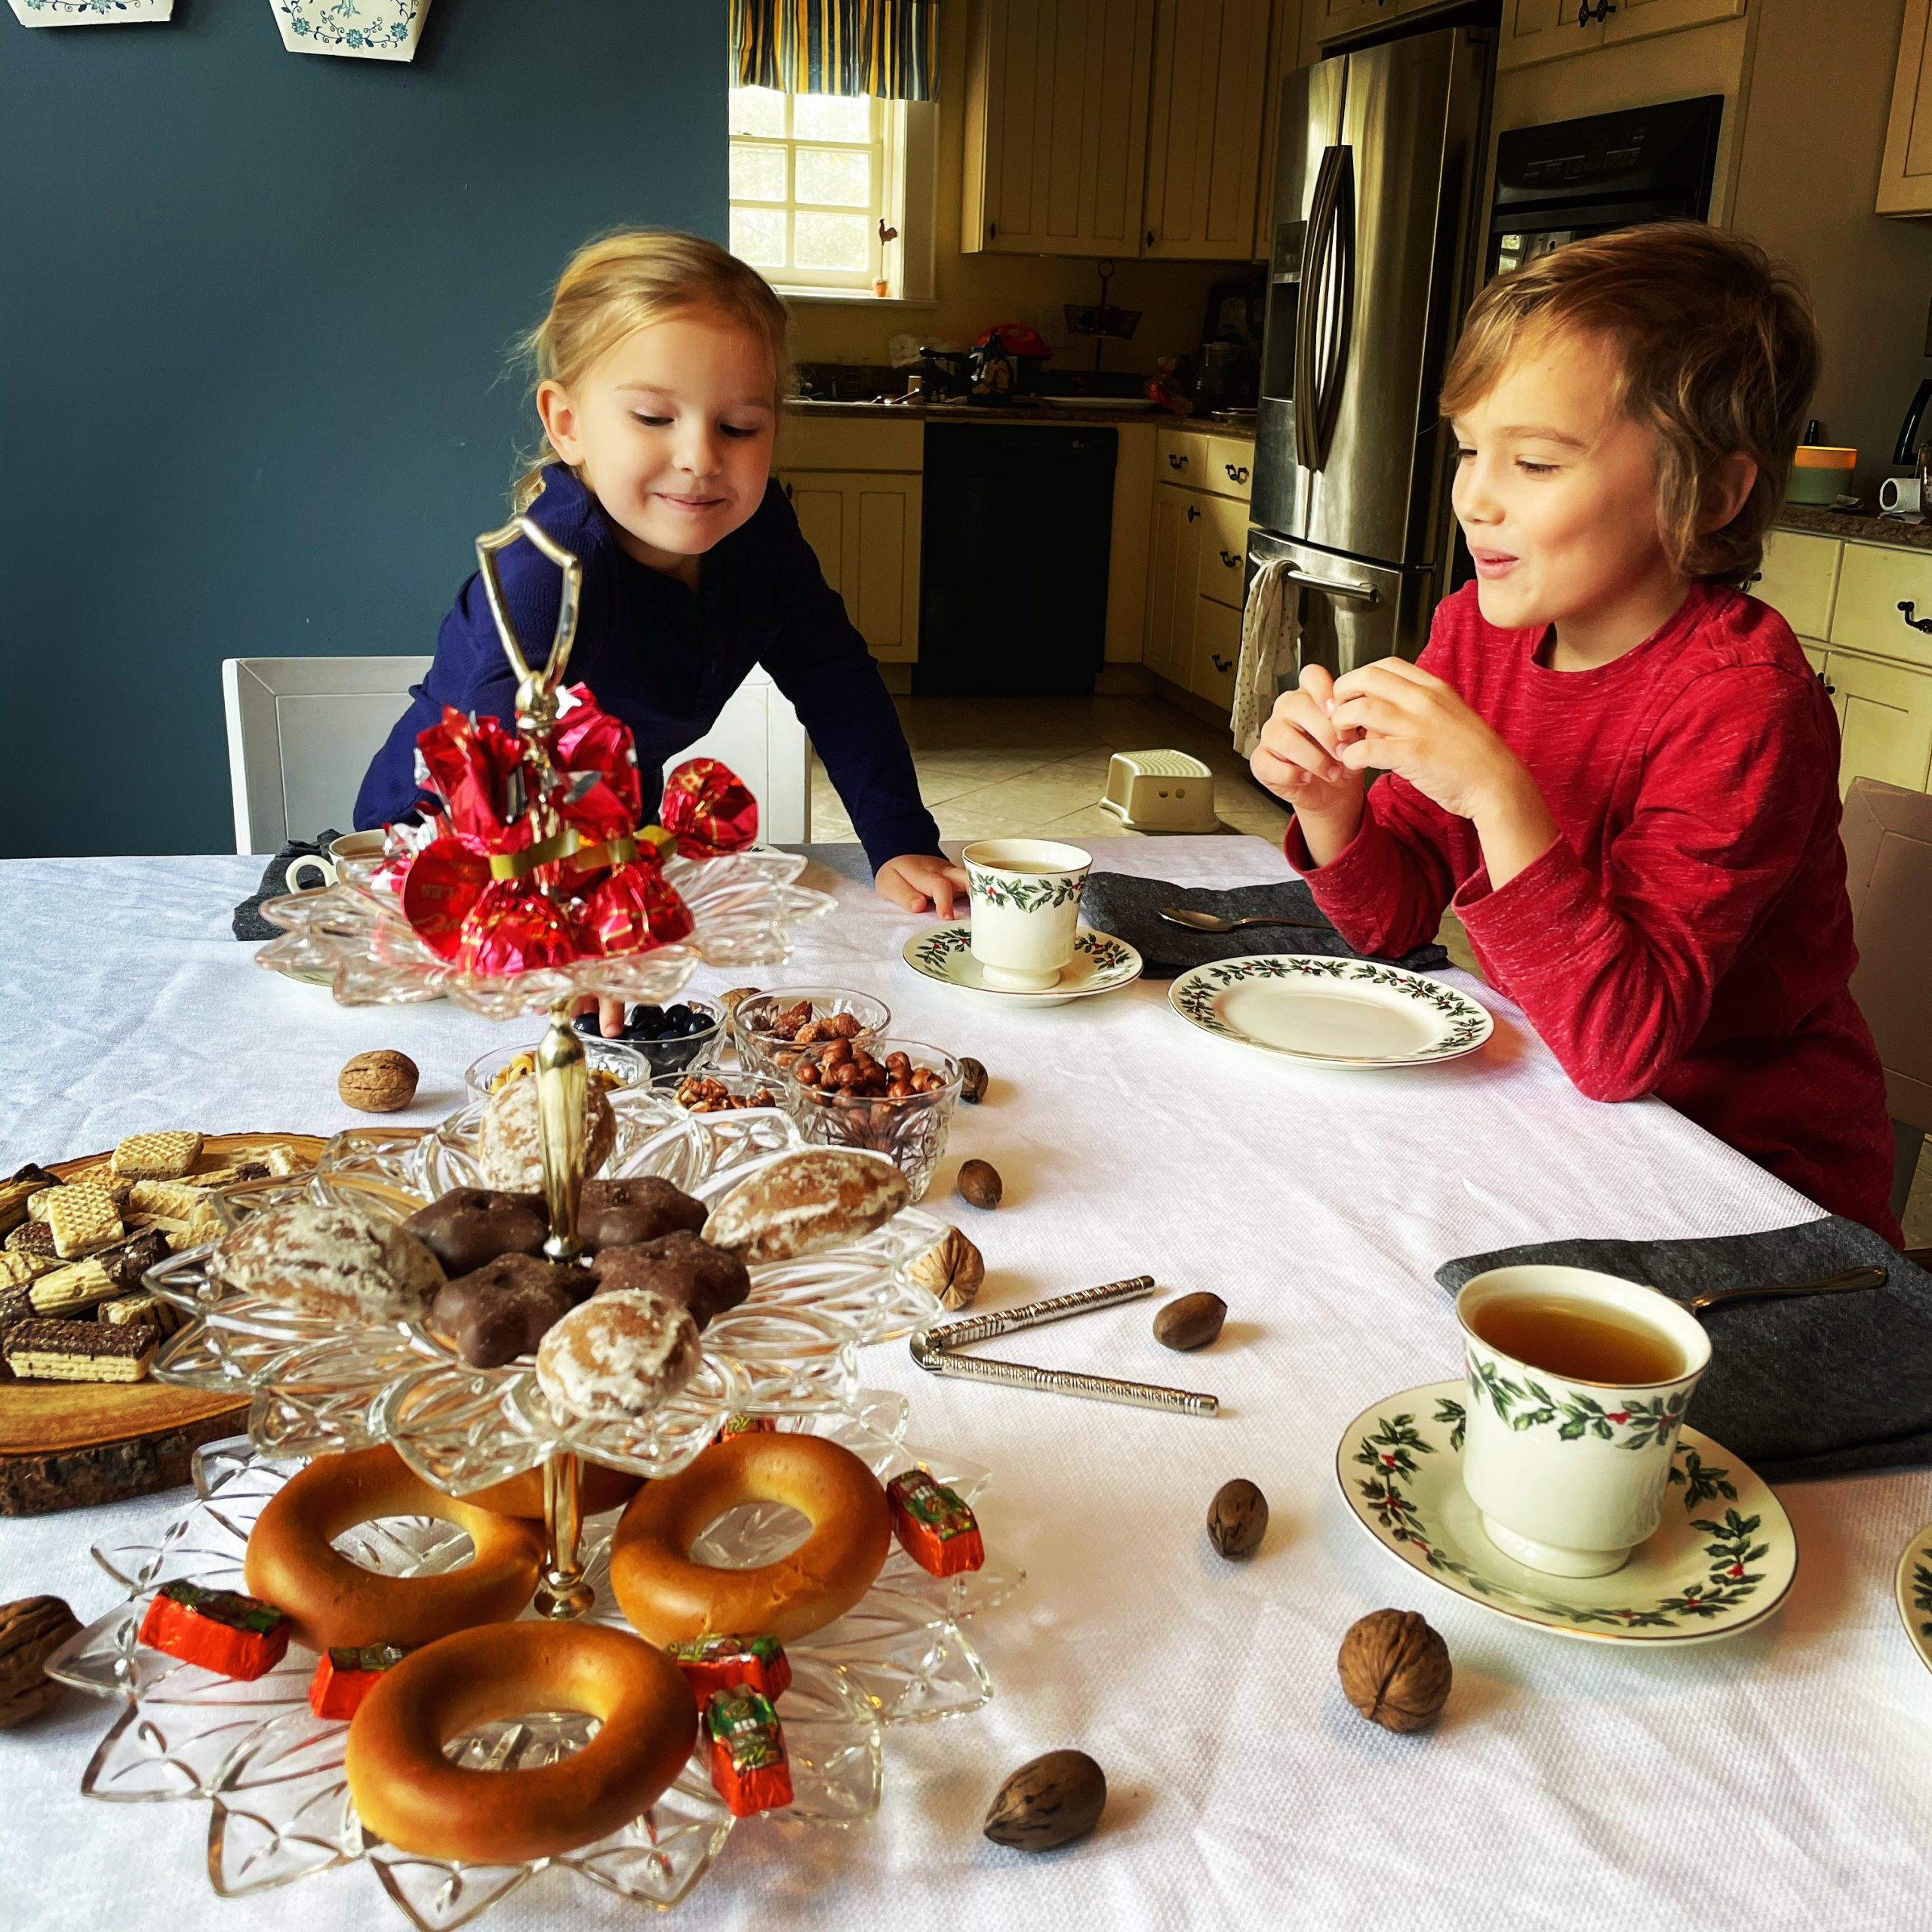 2 young kids at the table of sweets and tea